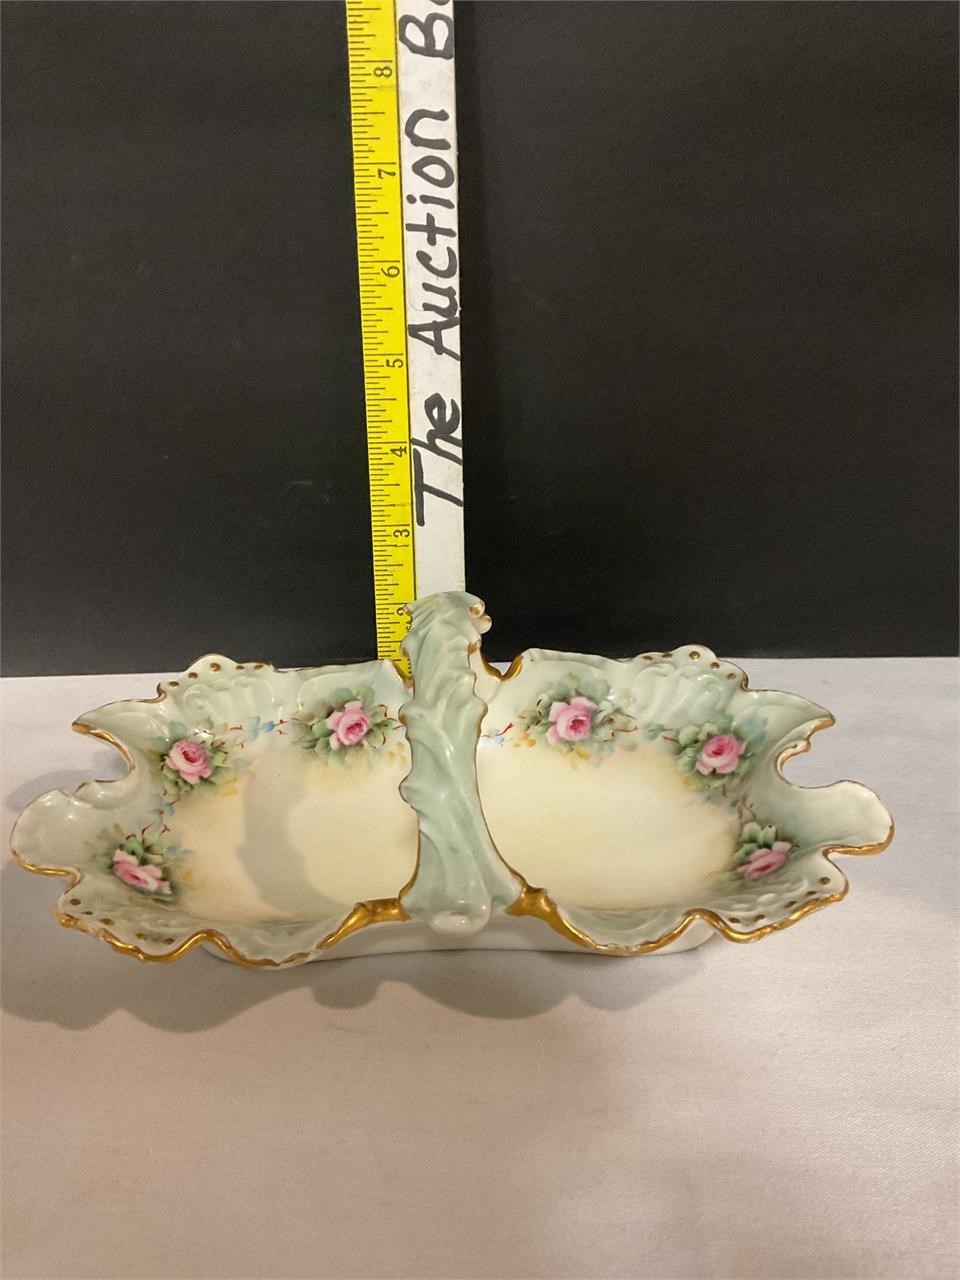 J.p. France dish with handle